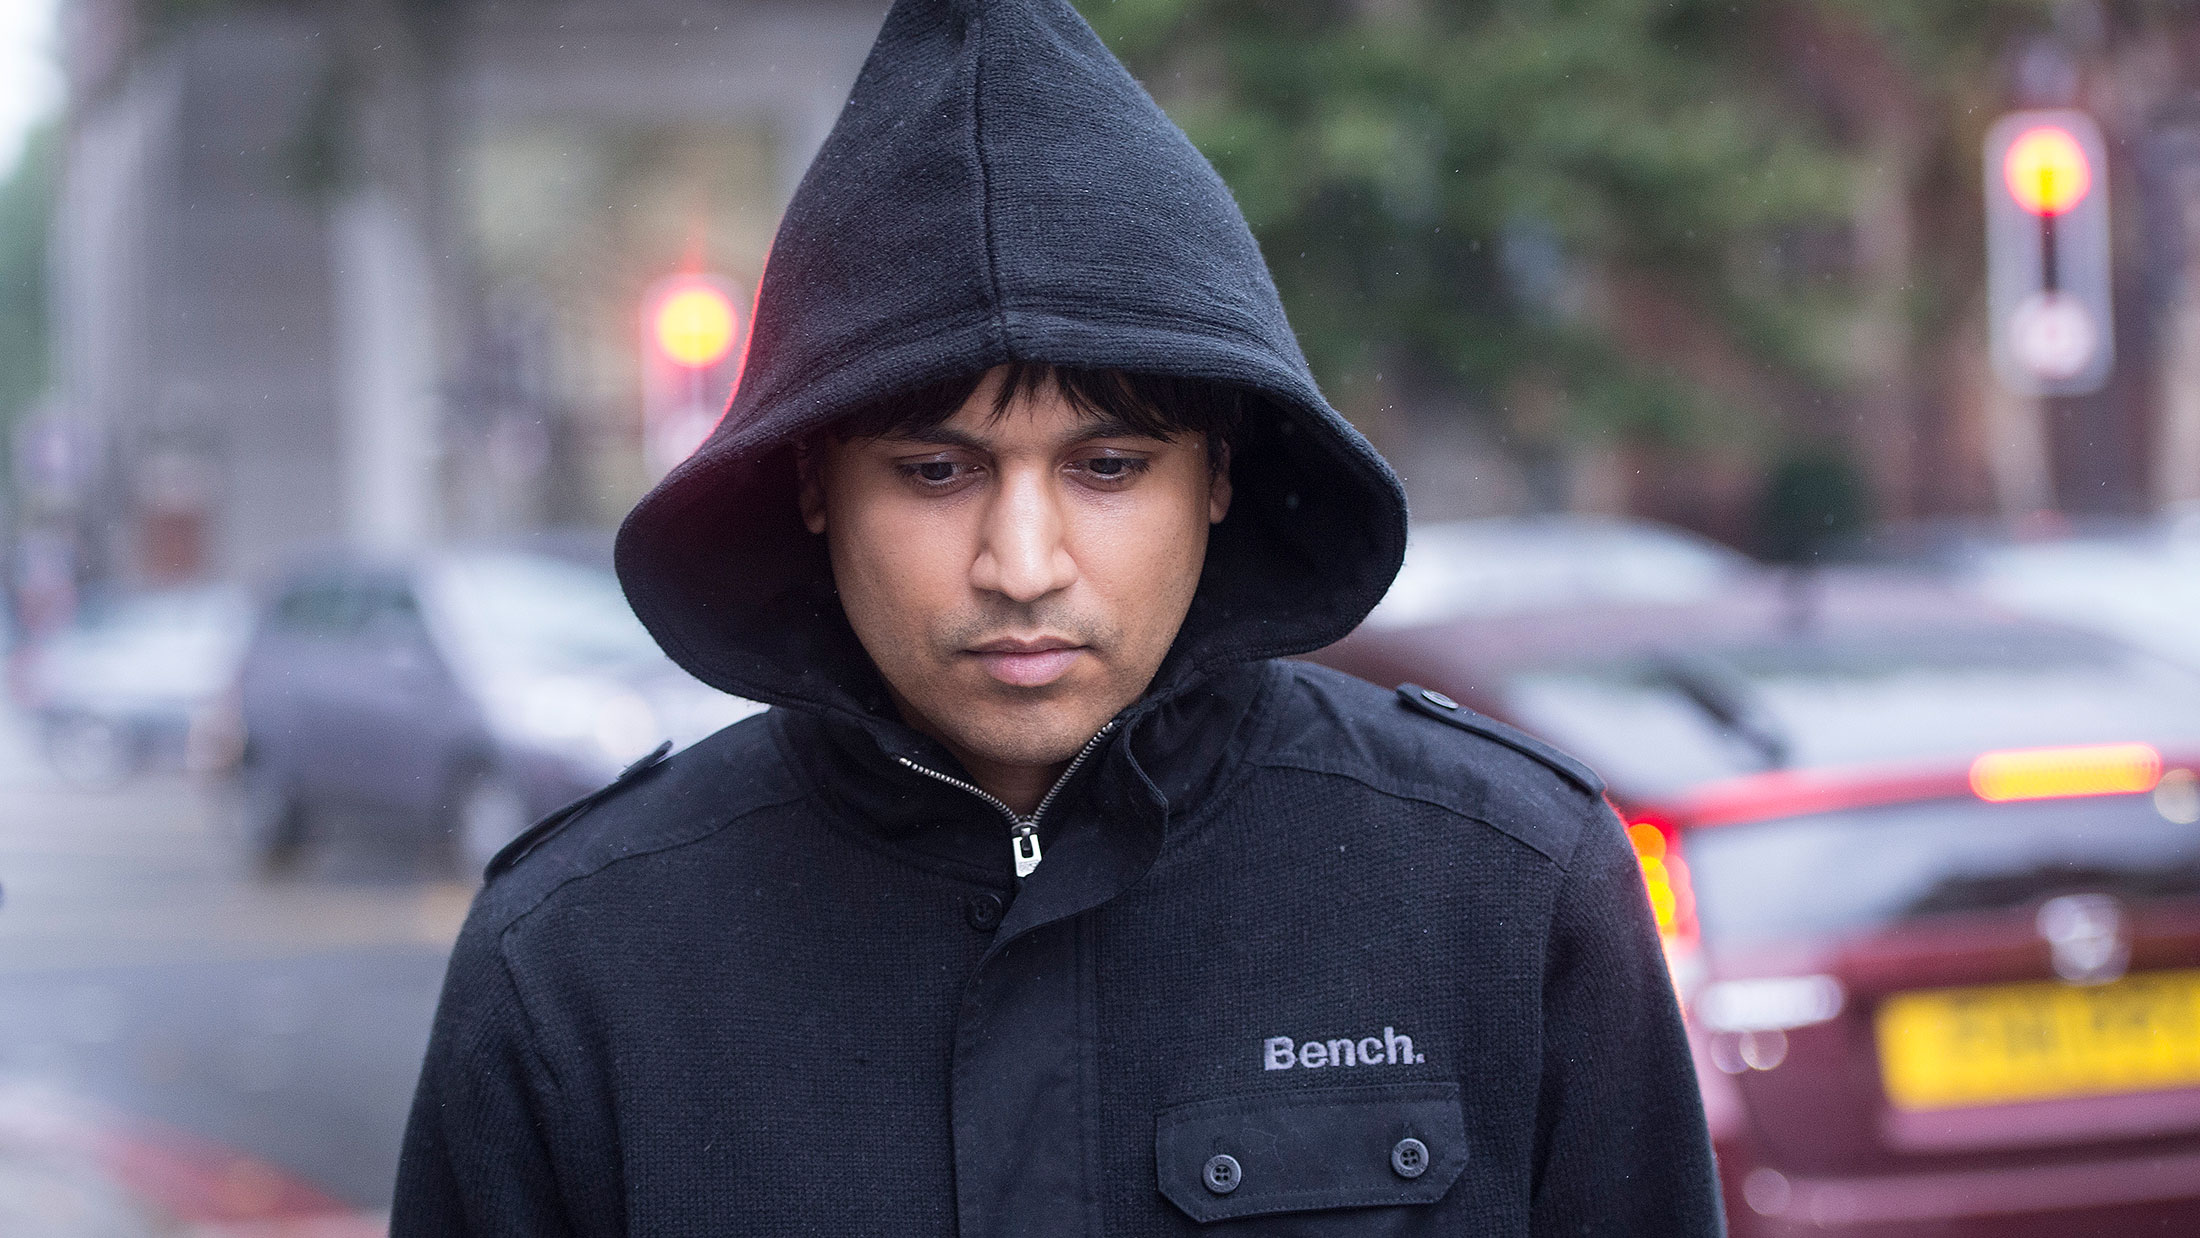 Navinder Singh Sarao, a British trader charged over his role in the 2010 U.S. flash crash, leaves Westminster magistrates in London on Aug., 14, 2015.
